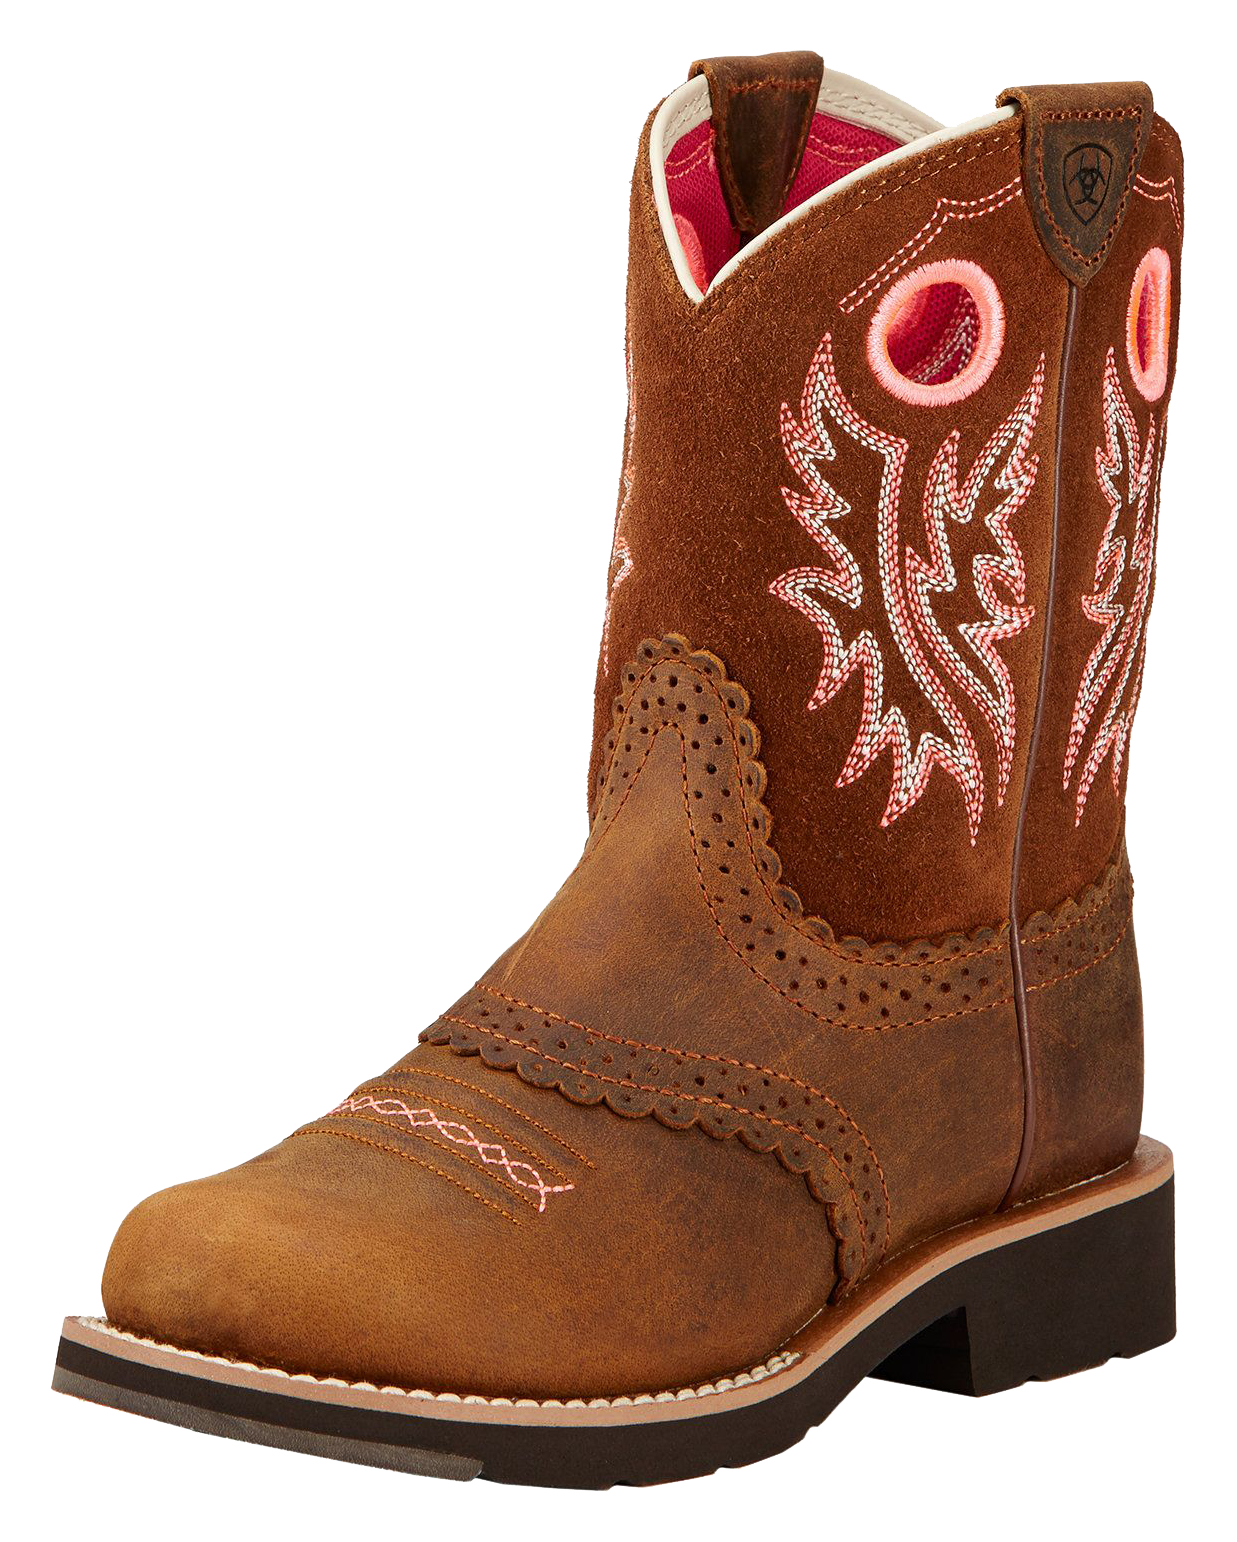 Ariat Fatbaby Cowgirl Western Boots for Kids - Powder Brown - 4.5 Kids